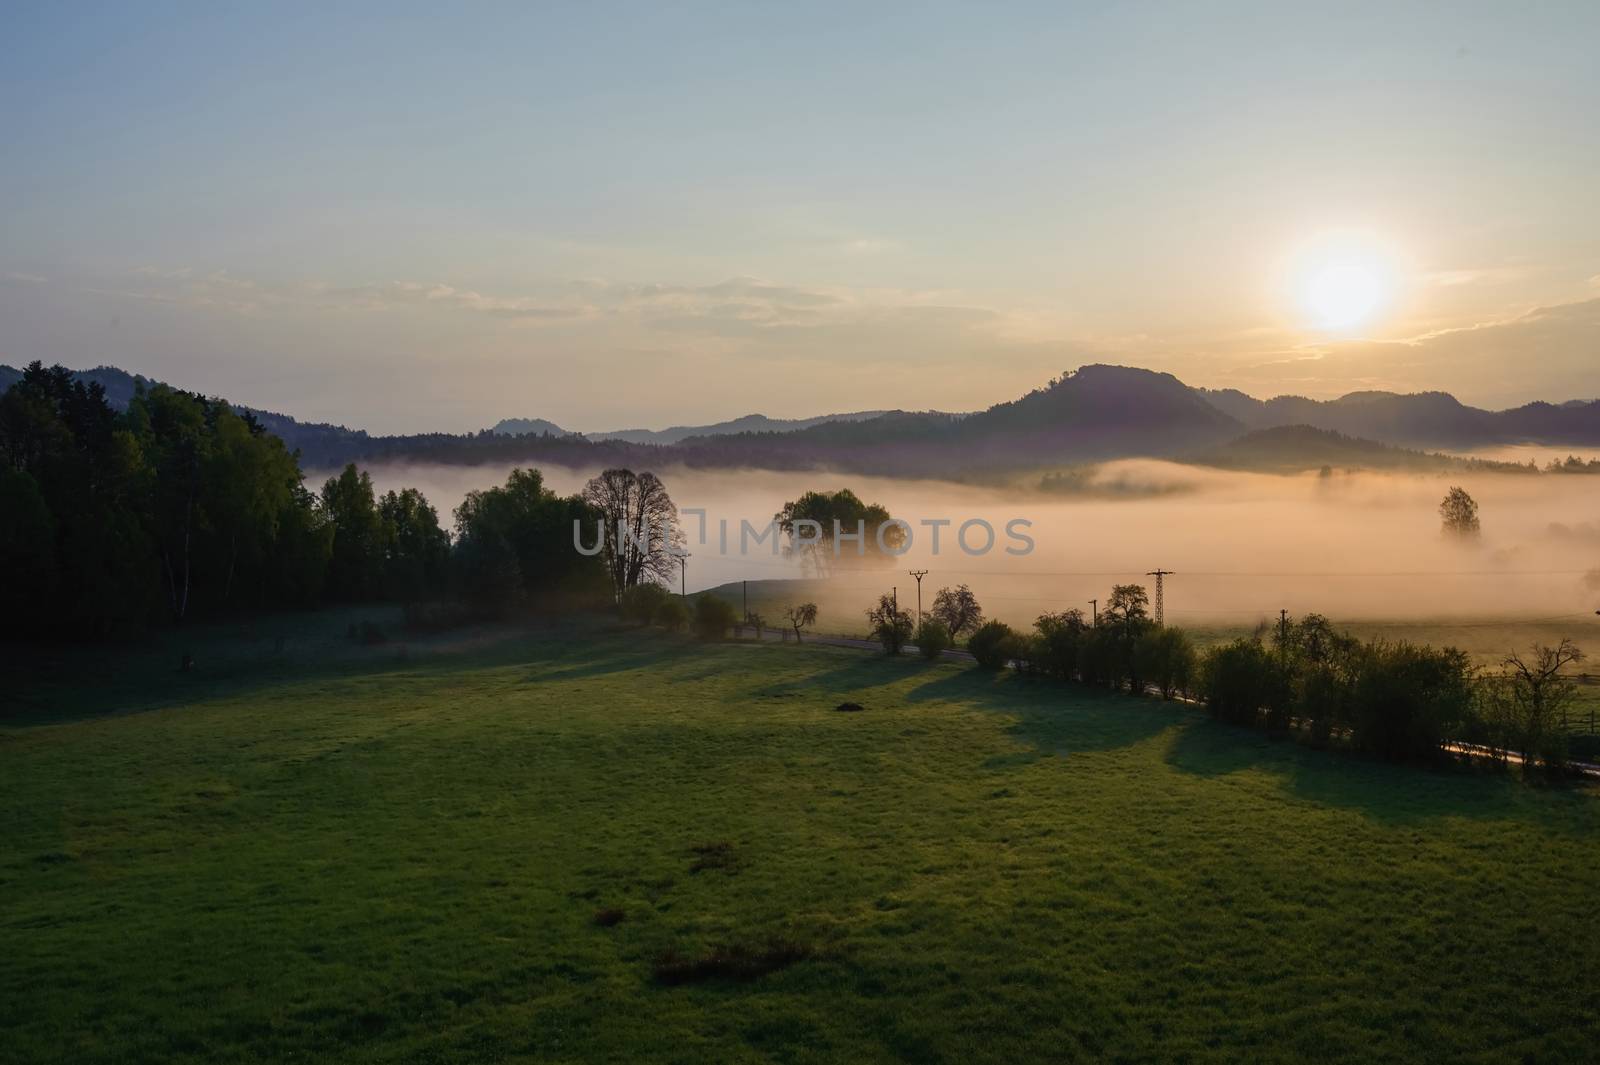 Autumn landscape with hills and forests in sunny morning mist